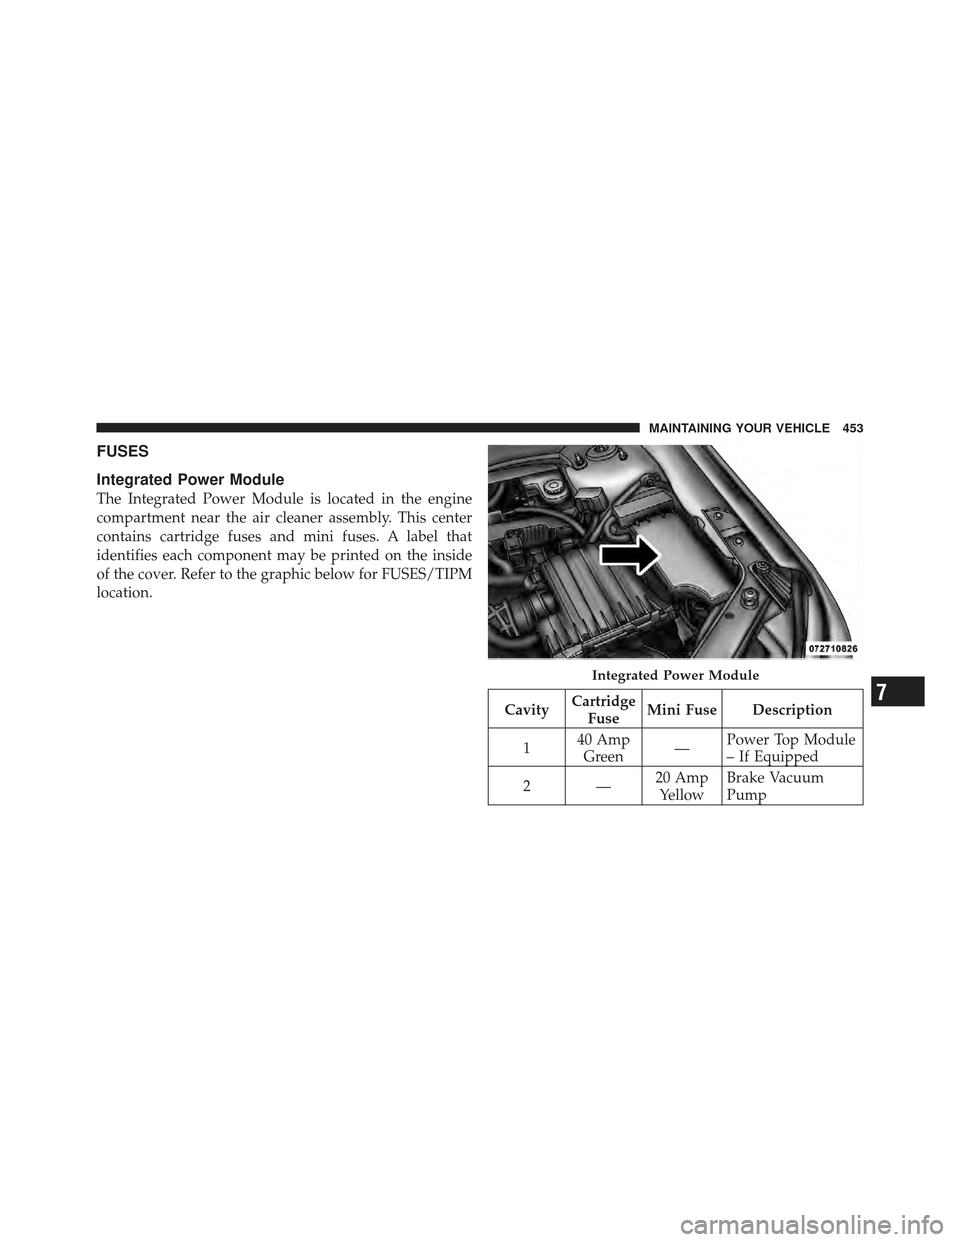 DODGE AVENGER 2012 2.G Owners Manual FUSES
Integrated Power Module
The Integrated Power Module is located in the engine
compartment near the air cleaner assembly. This center
contains cartridge fuses and mini fuses. A label that
identifi